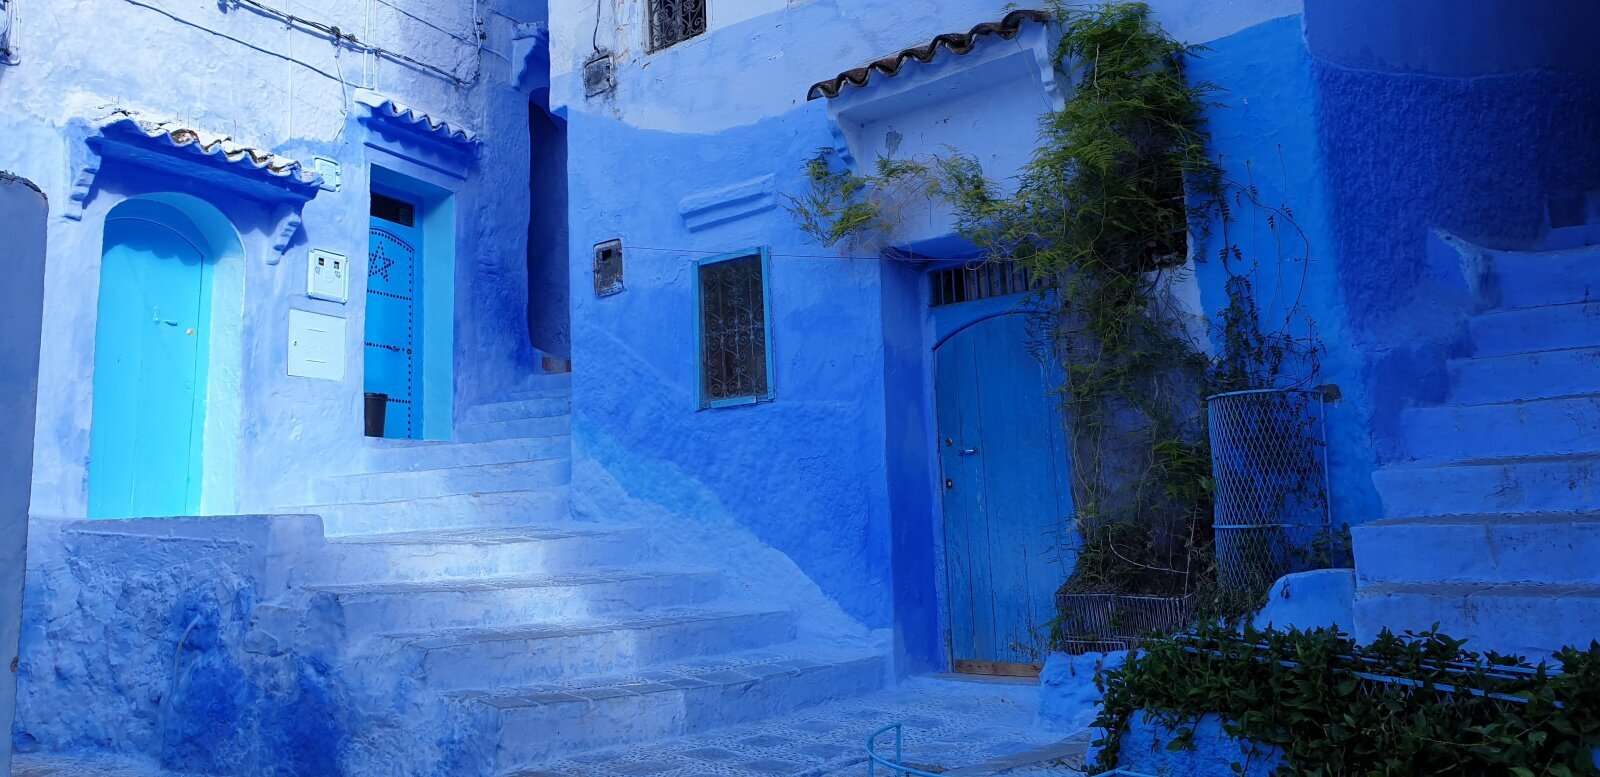 Shefchaouen neighborhoods: where to stay for tourists